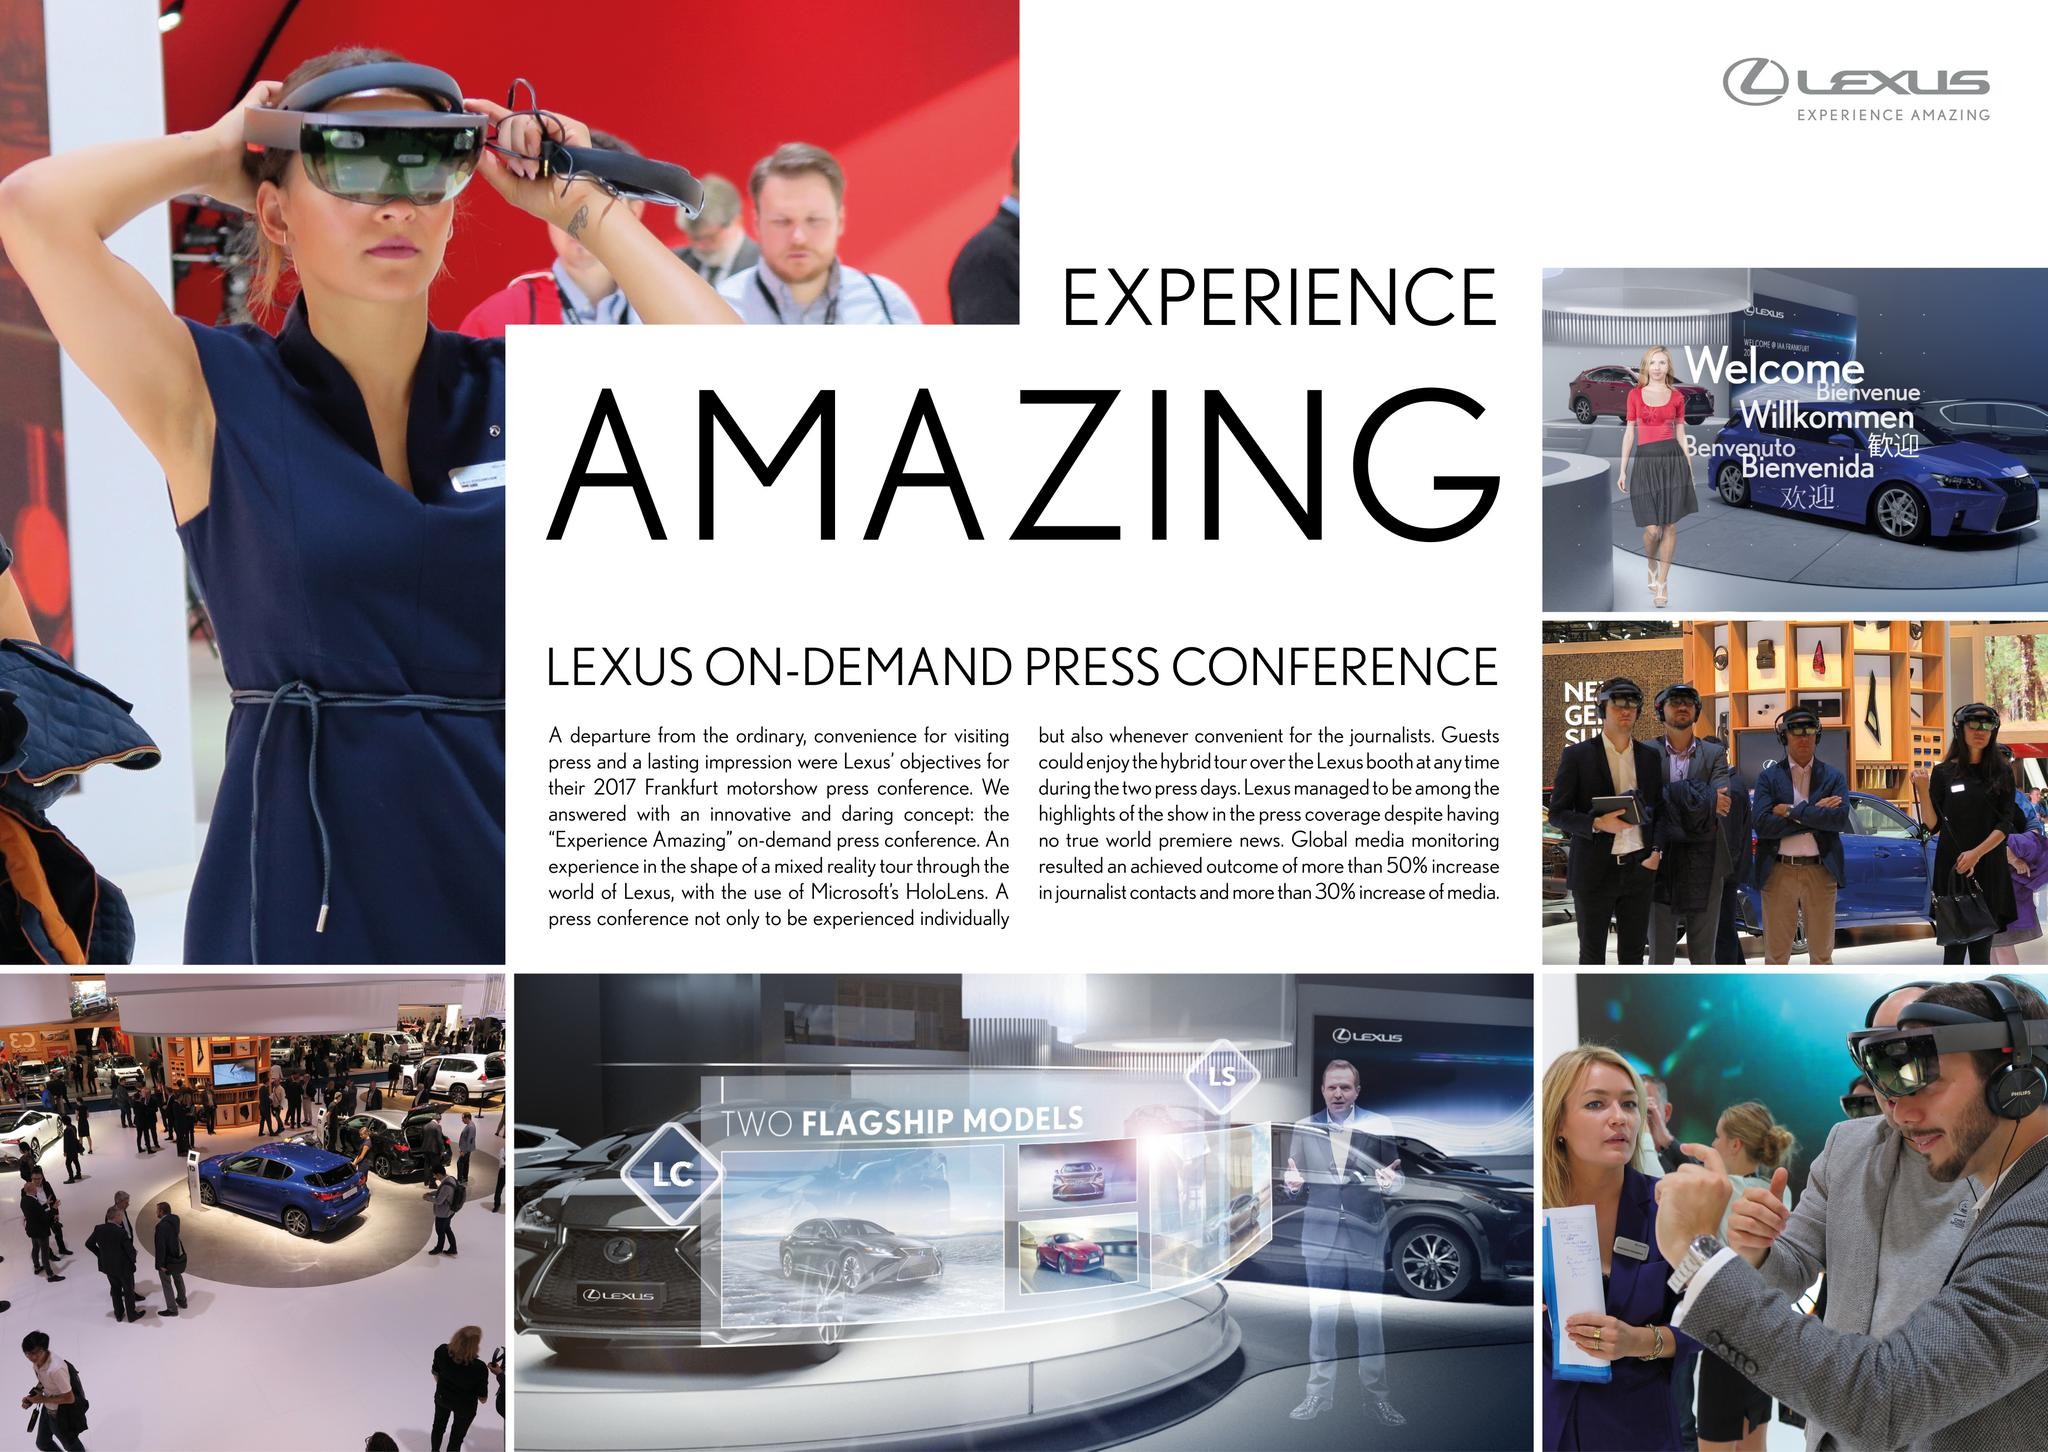 “Experience Amazing” – Lexus On-demand press conference